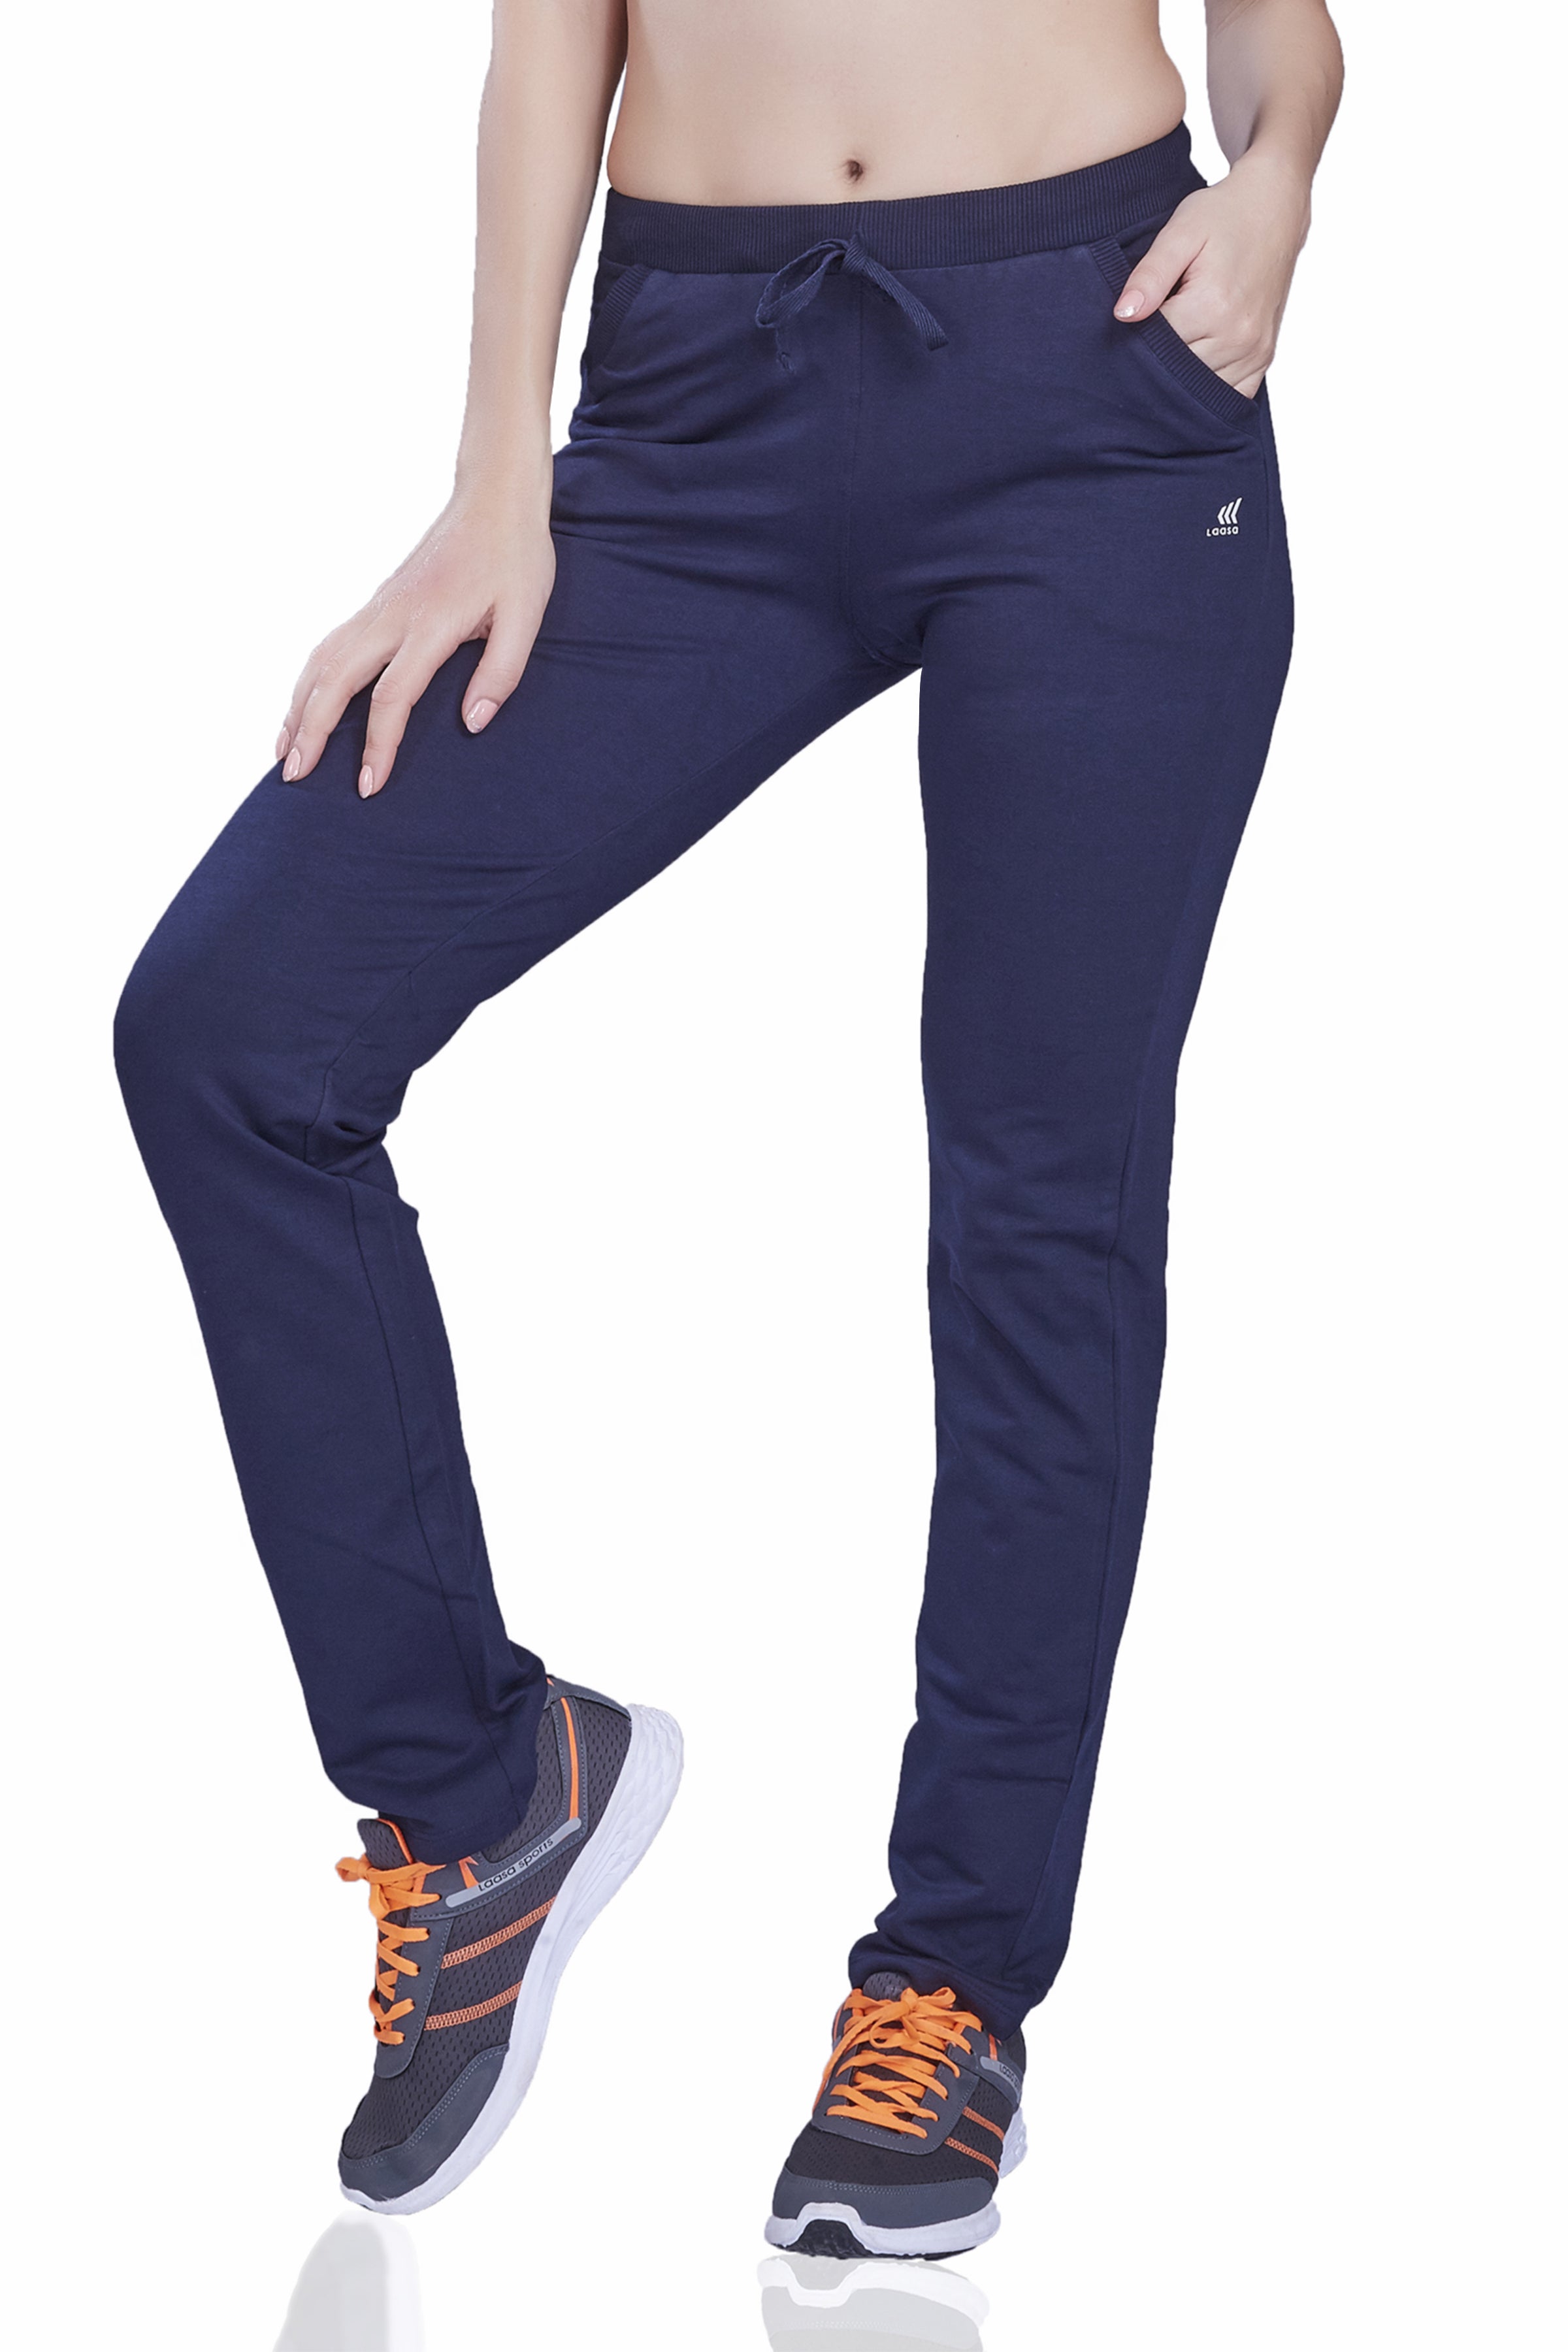 SHOWOFF Women's Abstract Slim Fit Blue Track Pant